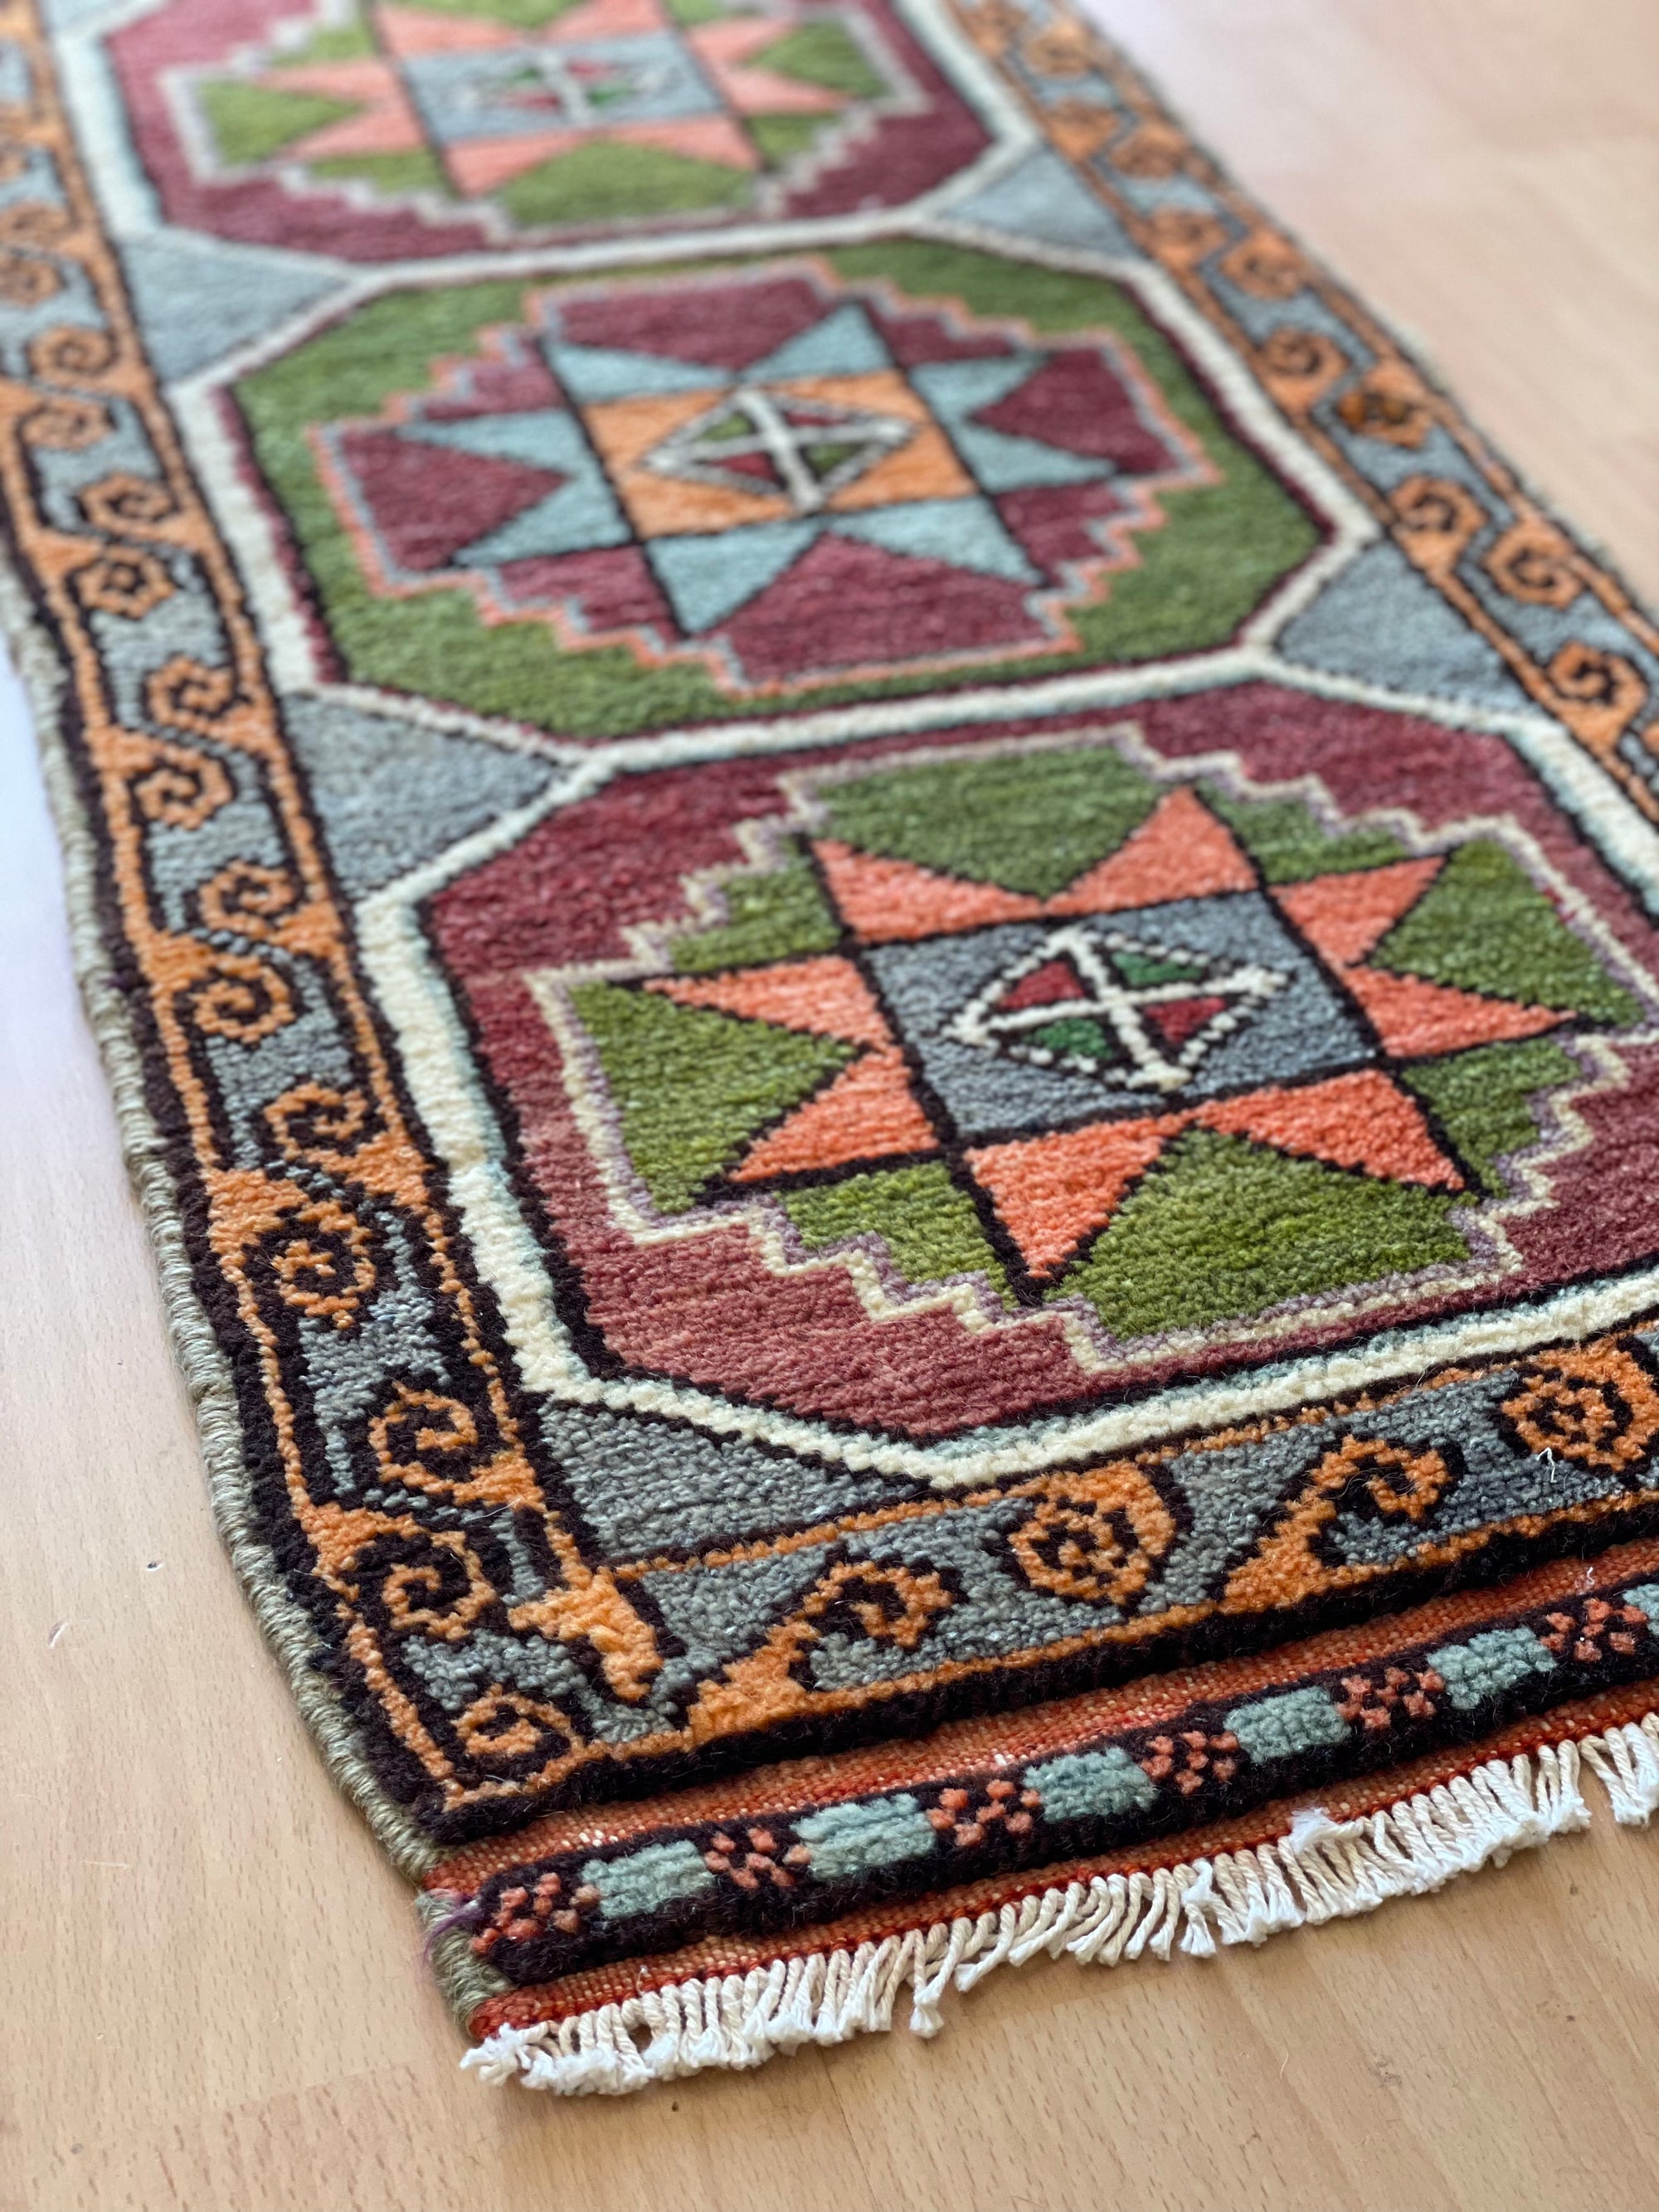 No. 523 Vintage Anatolian Scatter Rug